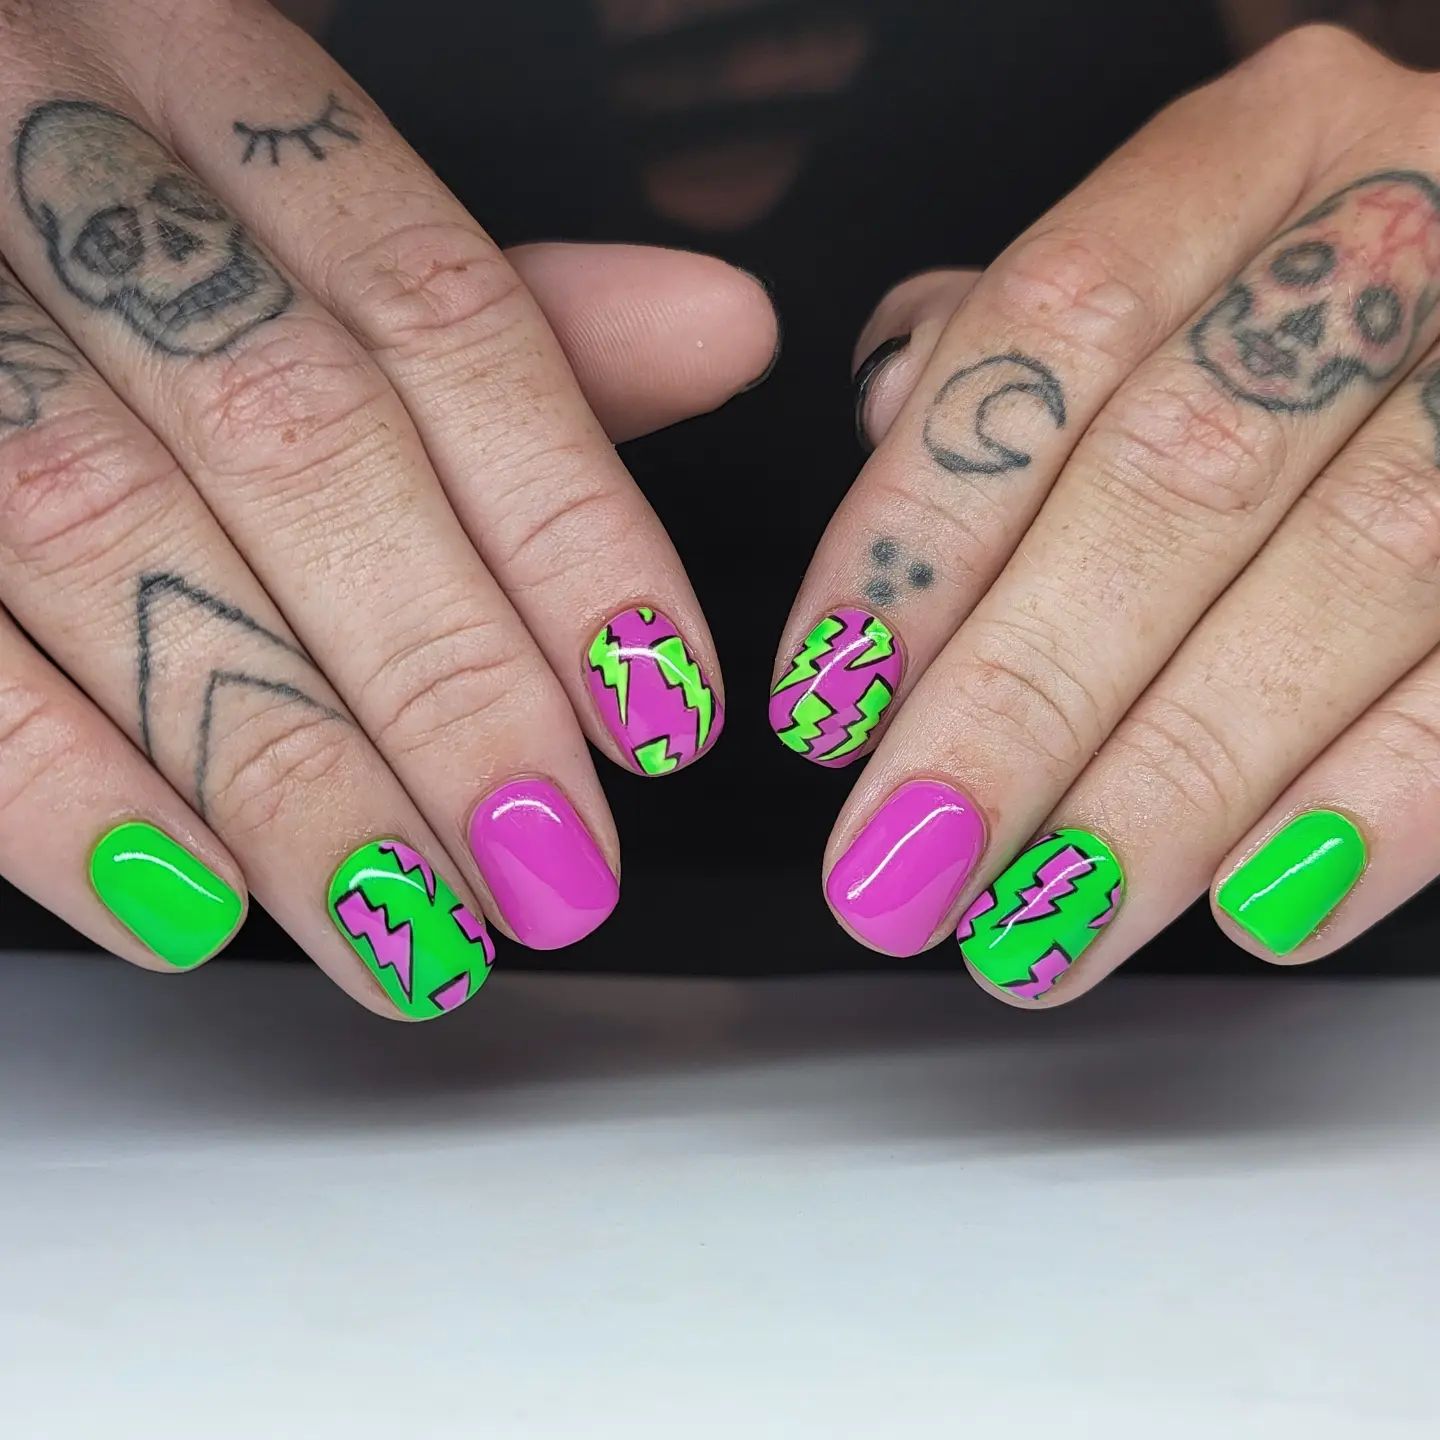 80s is the best decade in terms of colors, so here is a great 80s inspired accent nail idea for you. Besides the accent nails, color combination is perfect.